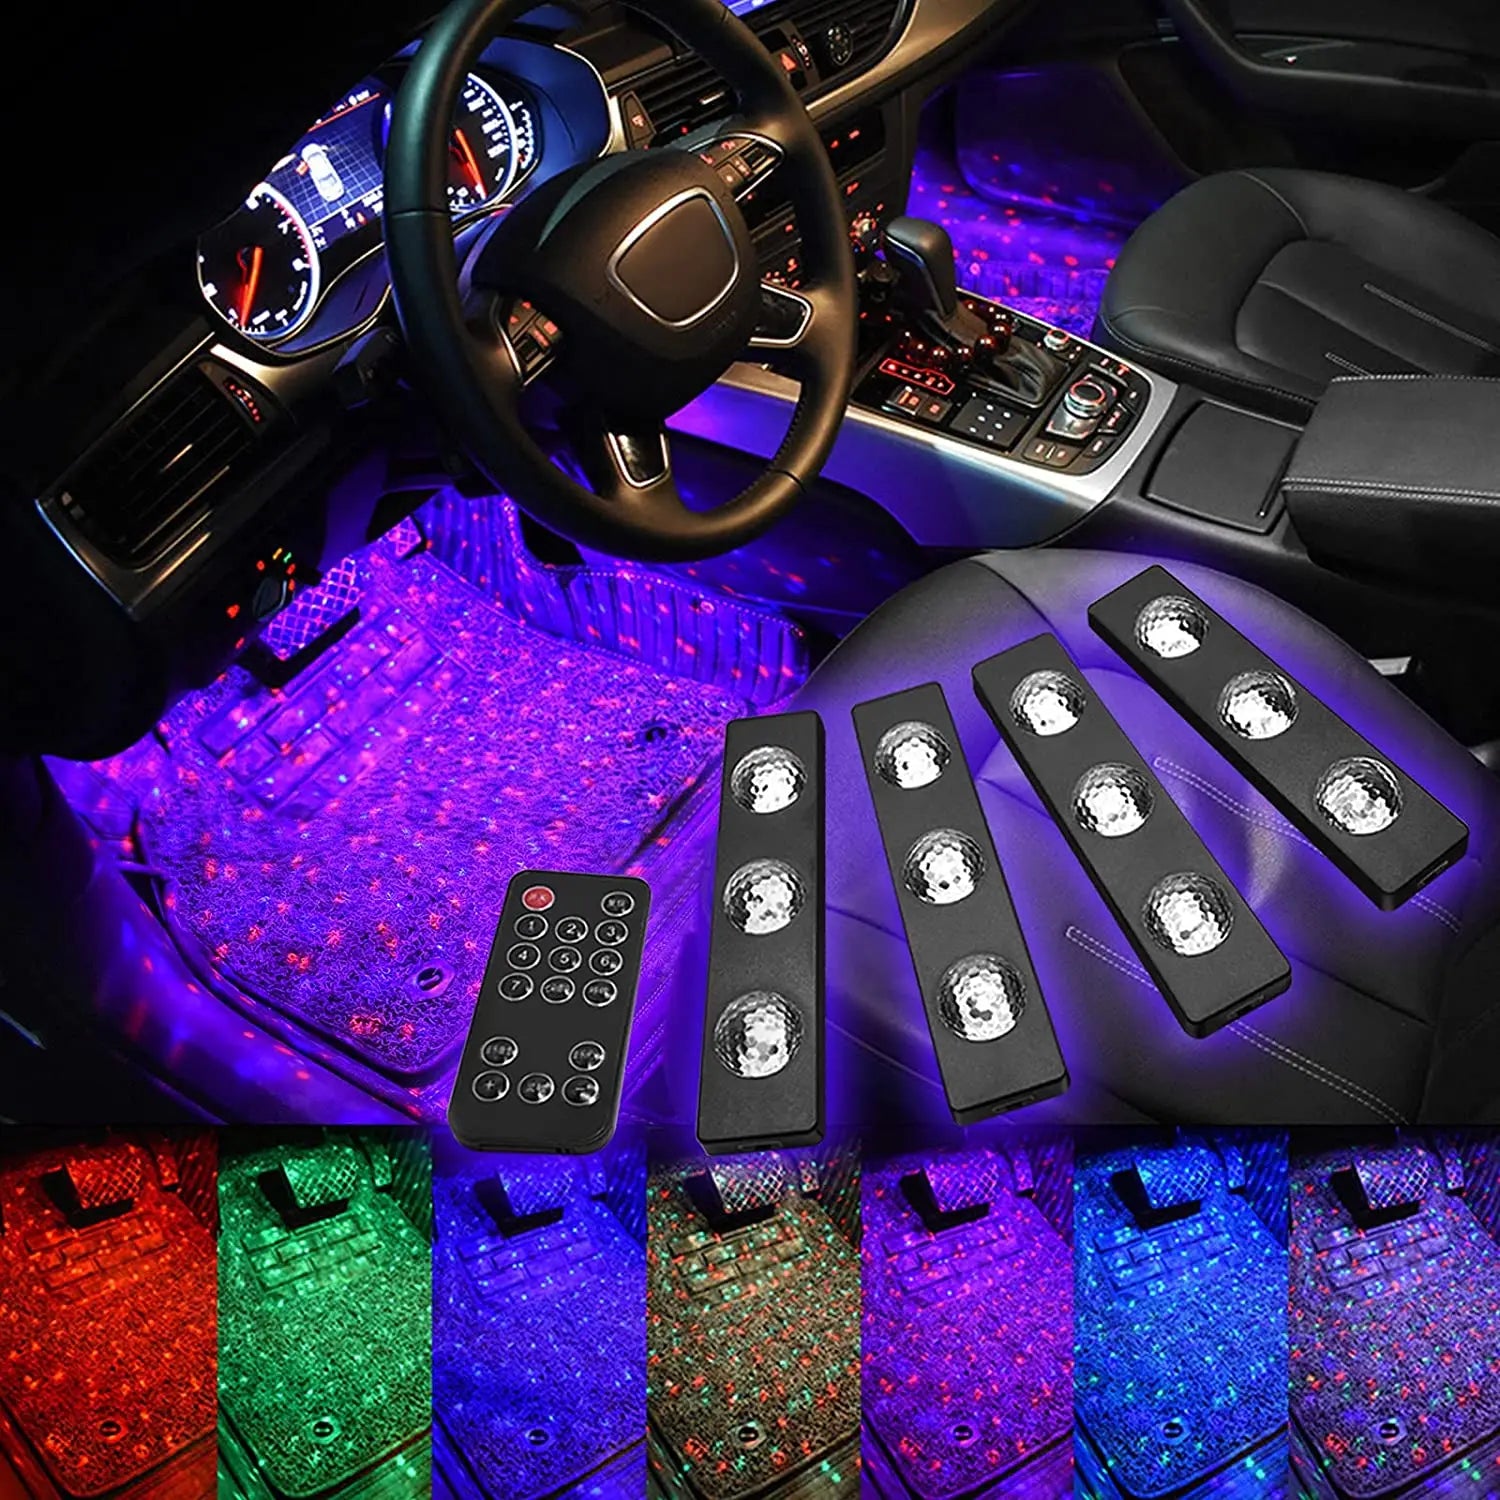 https://flasharkracing.com/cdn/shop/products/FLASHARK-Car-Interior-LED-Ambient-Lights_-USB-Plug-in-Stars-Atmosphere-Decorative-Muti-Color-Light-underdash-for-Any-Carpet-Lighting-kit-_4-Packs-with-Remote-and-Sound-Control_-Flasha.jpg?v=1650357291&width=1500